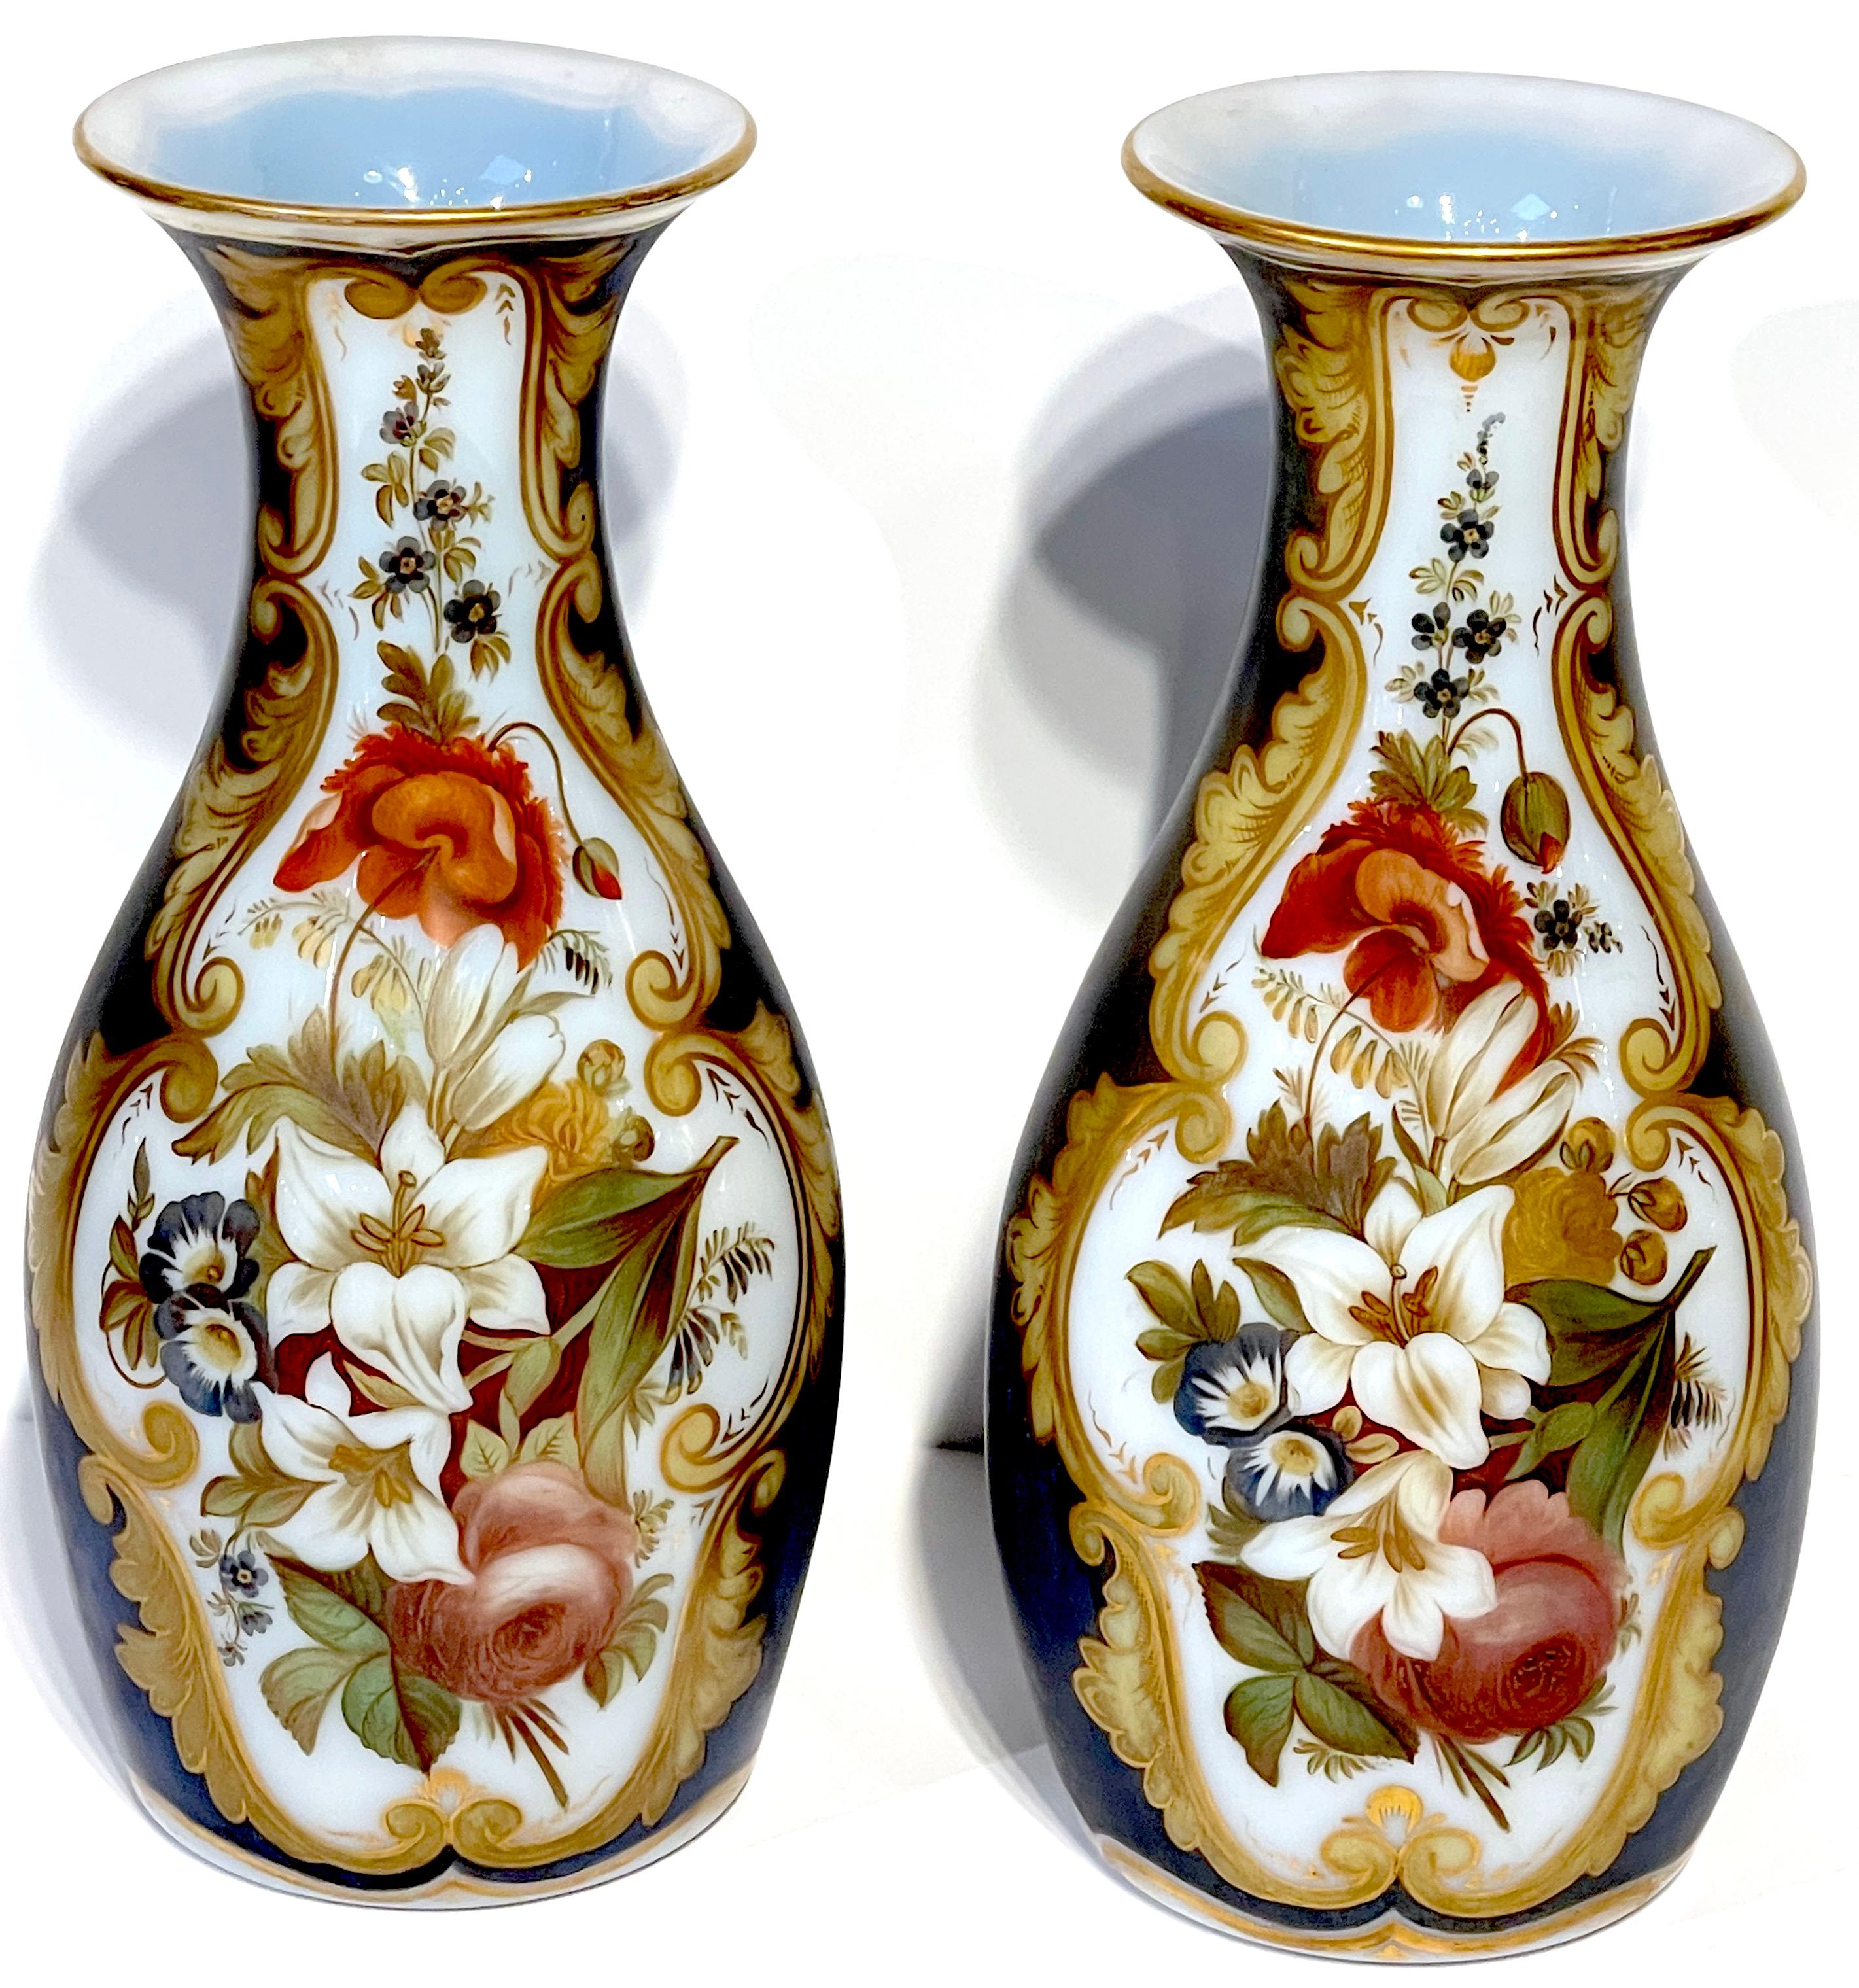 Pair of Opaline Floral Vases, Attributed Jean François Robert for Baccarat 
France, Mid 19th Century 

Jean-François Robert was a 19th Century French enamellist, active at Baccarat  1843-1855. 

Add to your collection with this exquisite pair of